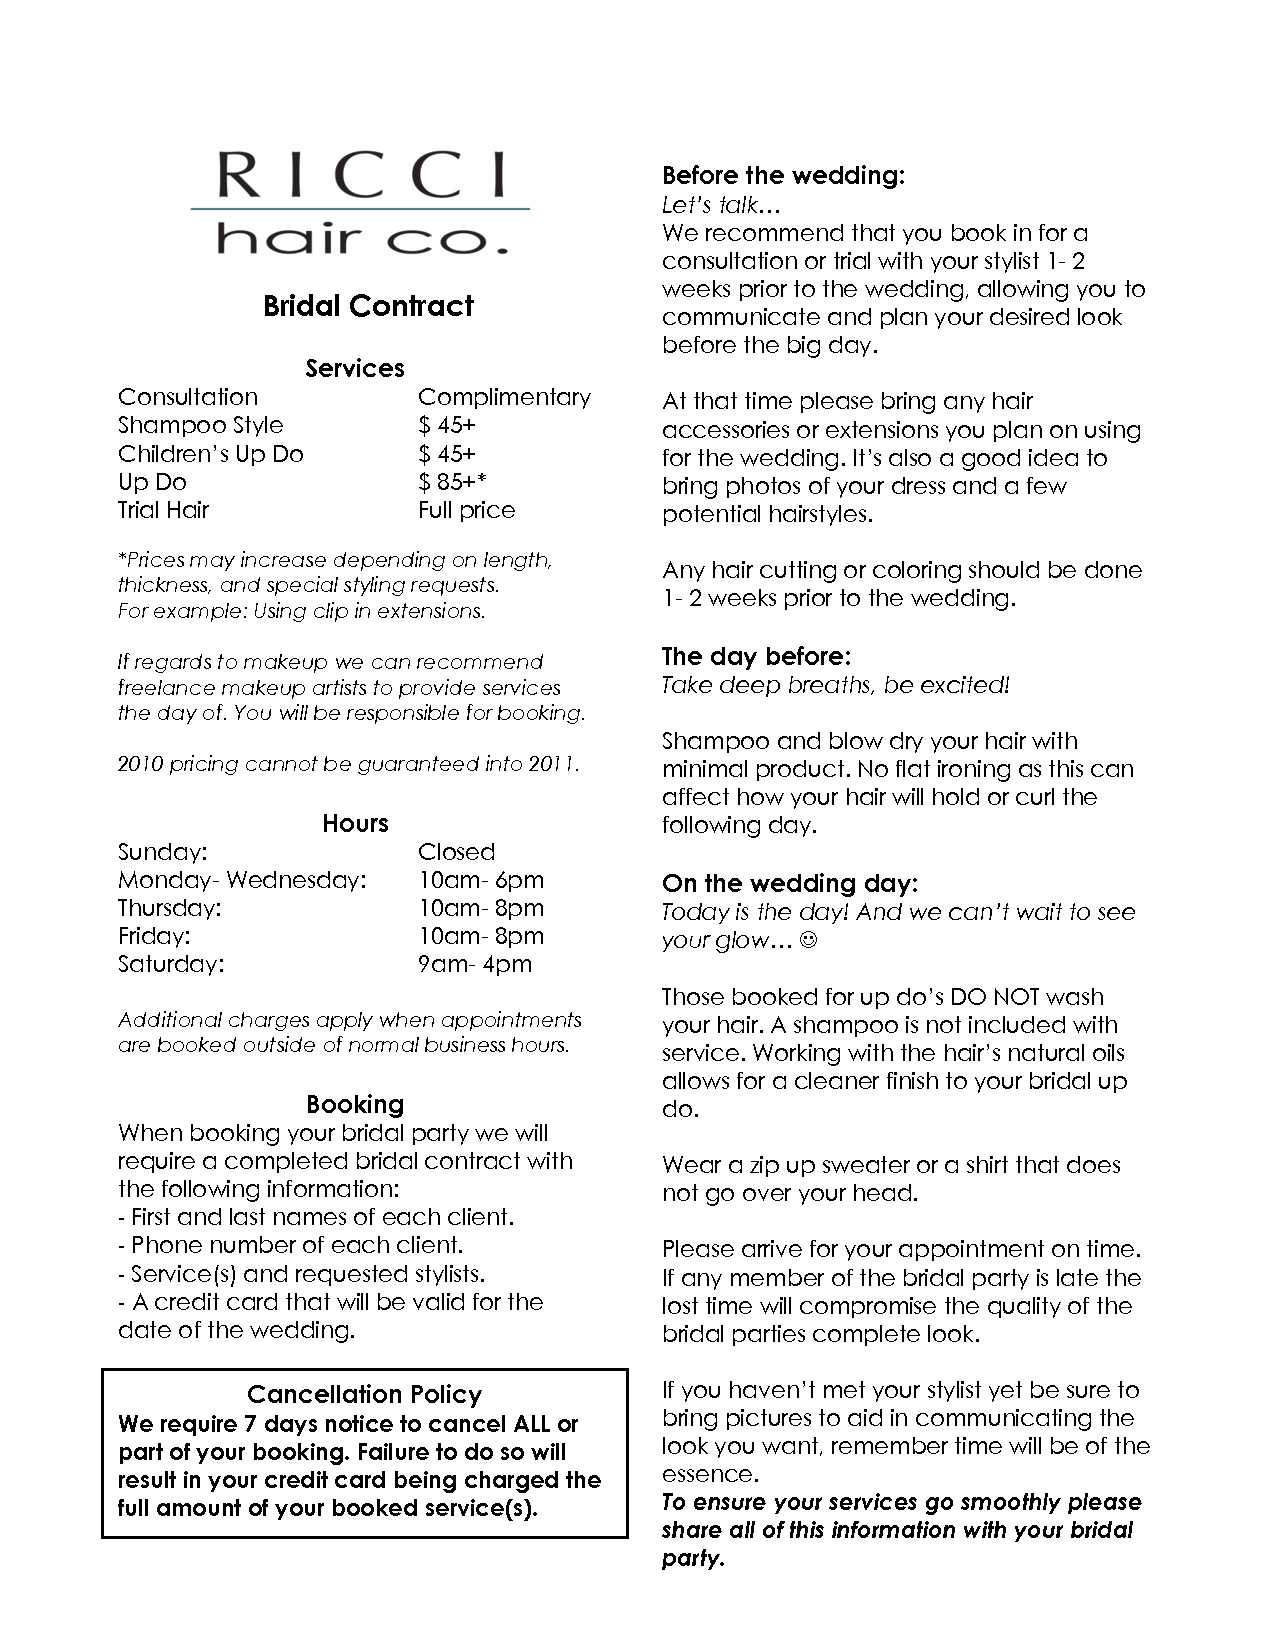 Hair Stylist Contract Template Bridalhaircotract Bridal Hair Stylist Contract